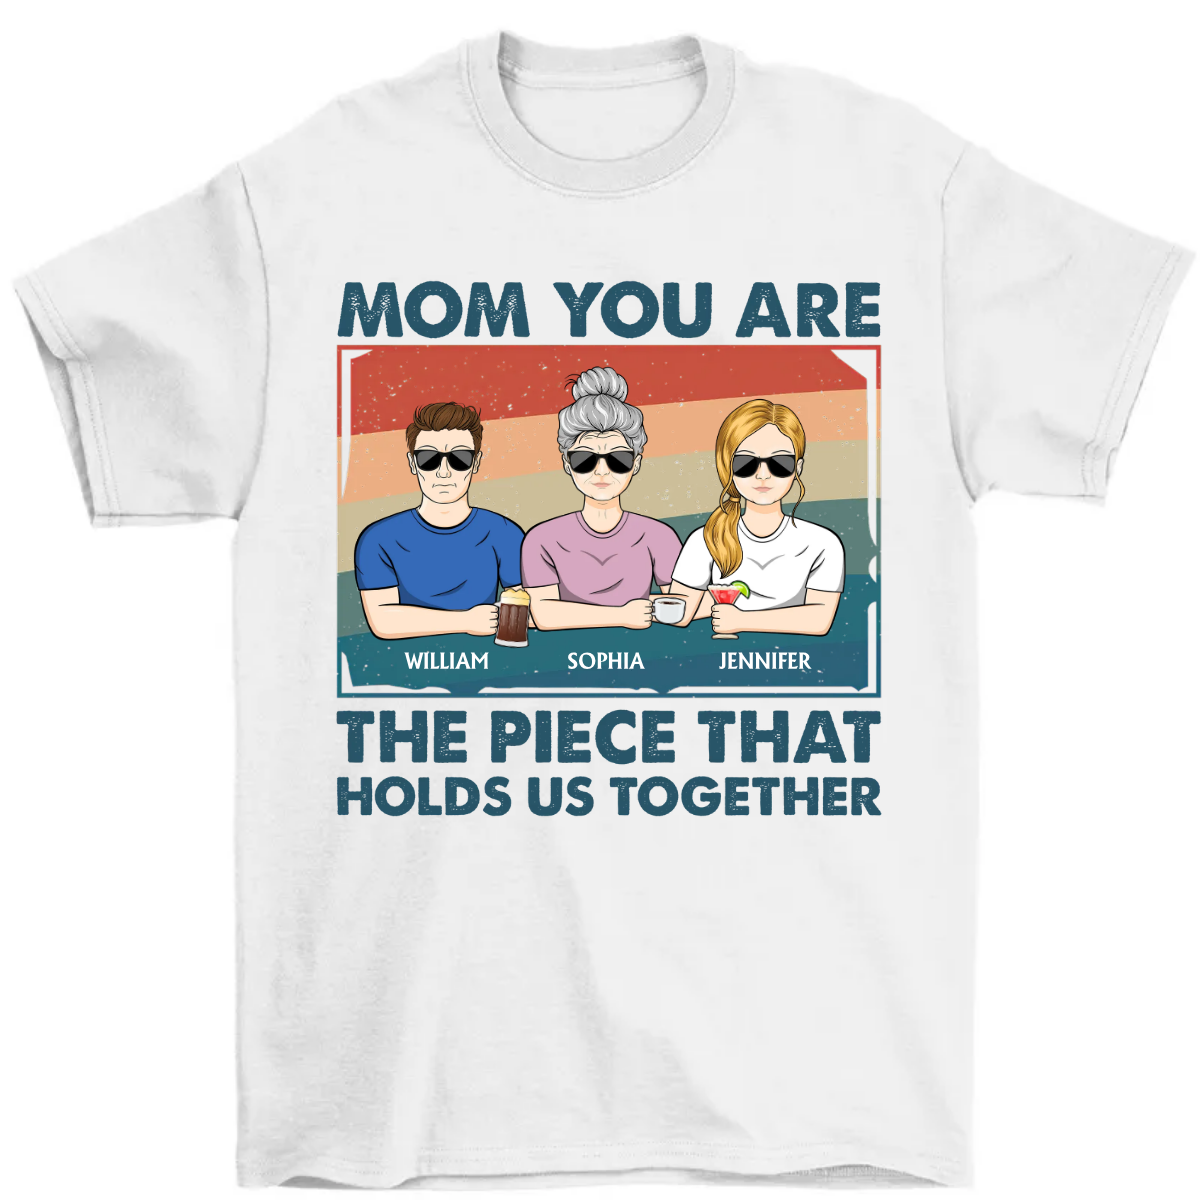 Mom You Are The Piece That Holds Us Together - Mothers Day Gift - Personalized T Shirt